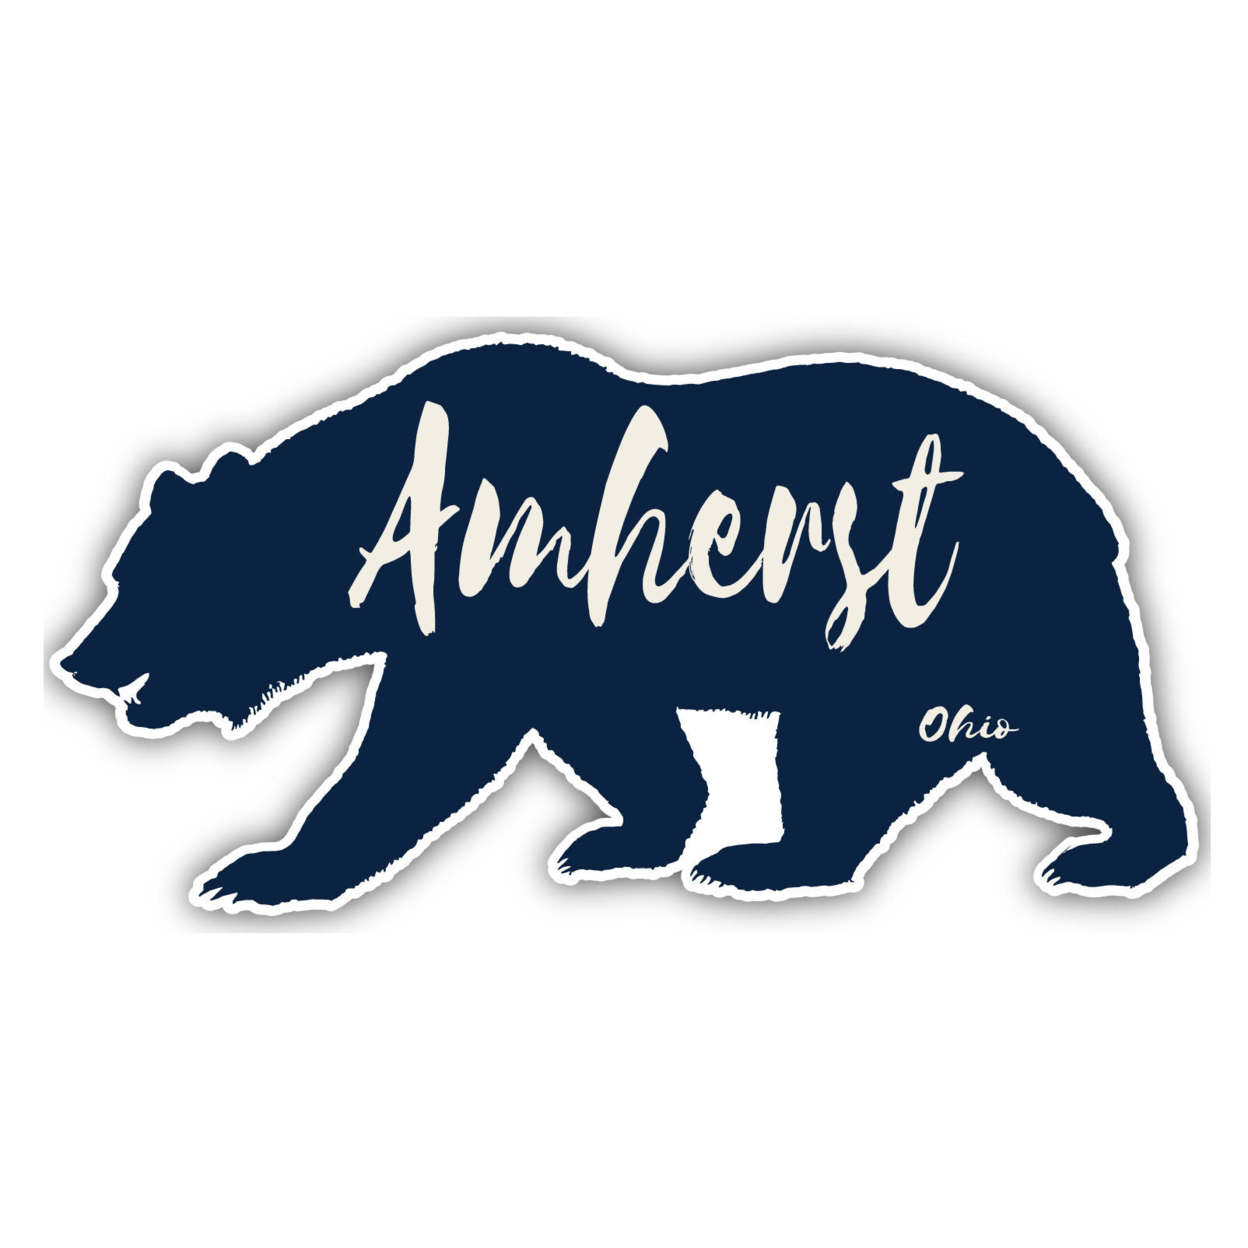 Amherst Ohio Souvenir Decorative Stickers (Choose Theme And Size) - 4-Pack, 12-Inch, Bear